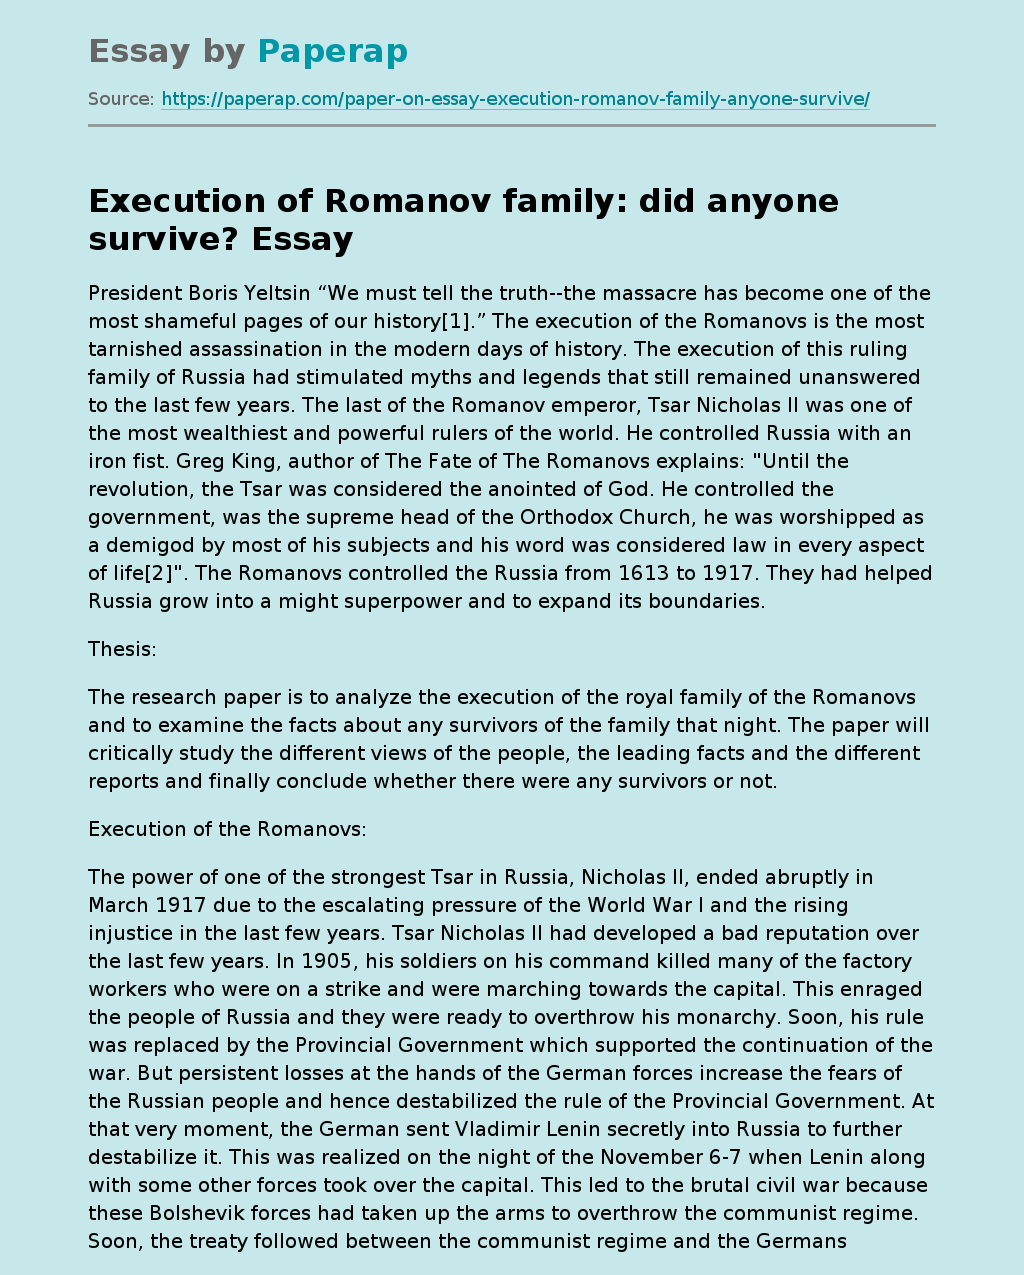 Execution of Romanov Family: Did Anyone Survive?